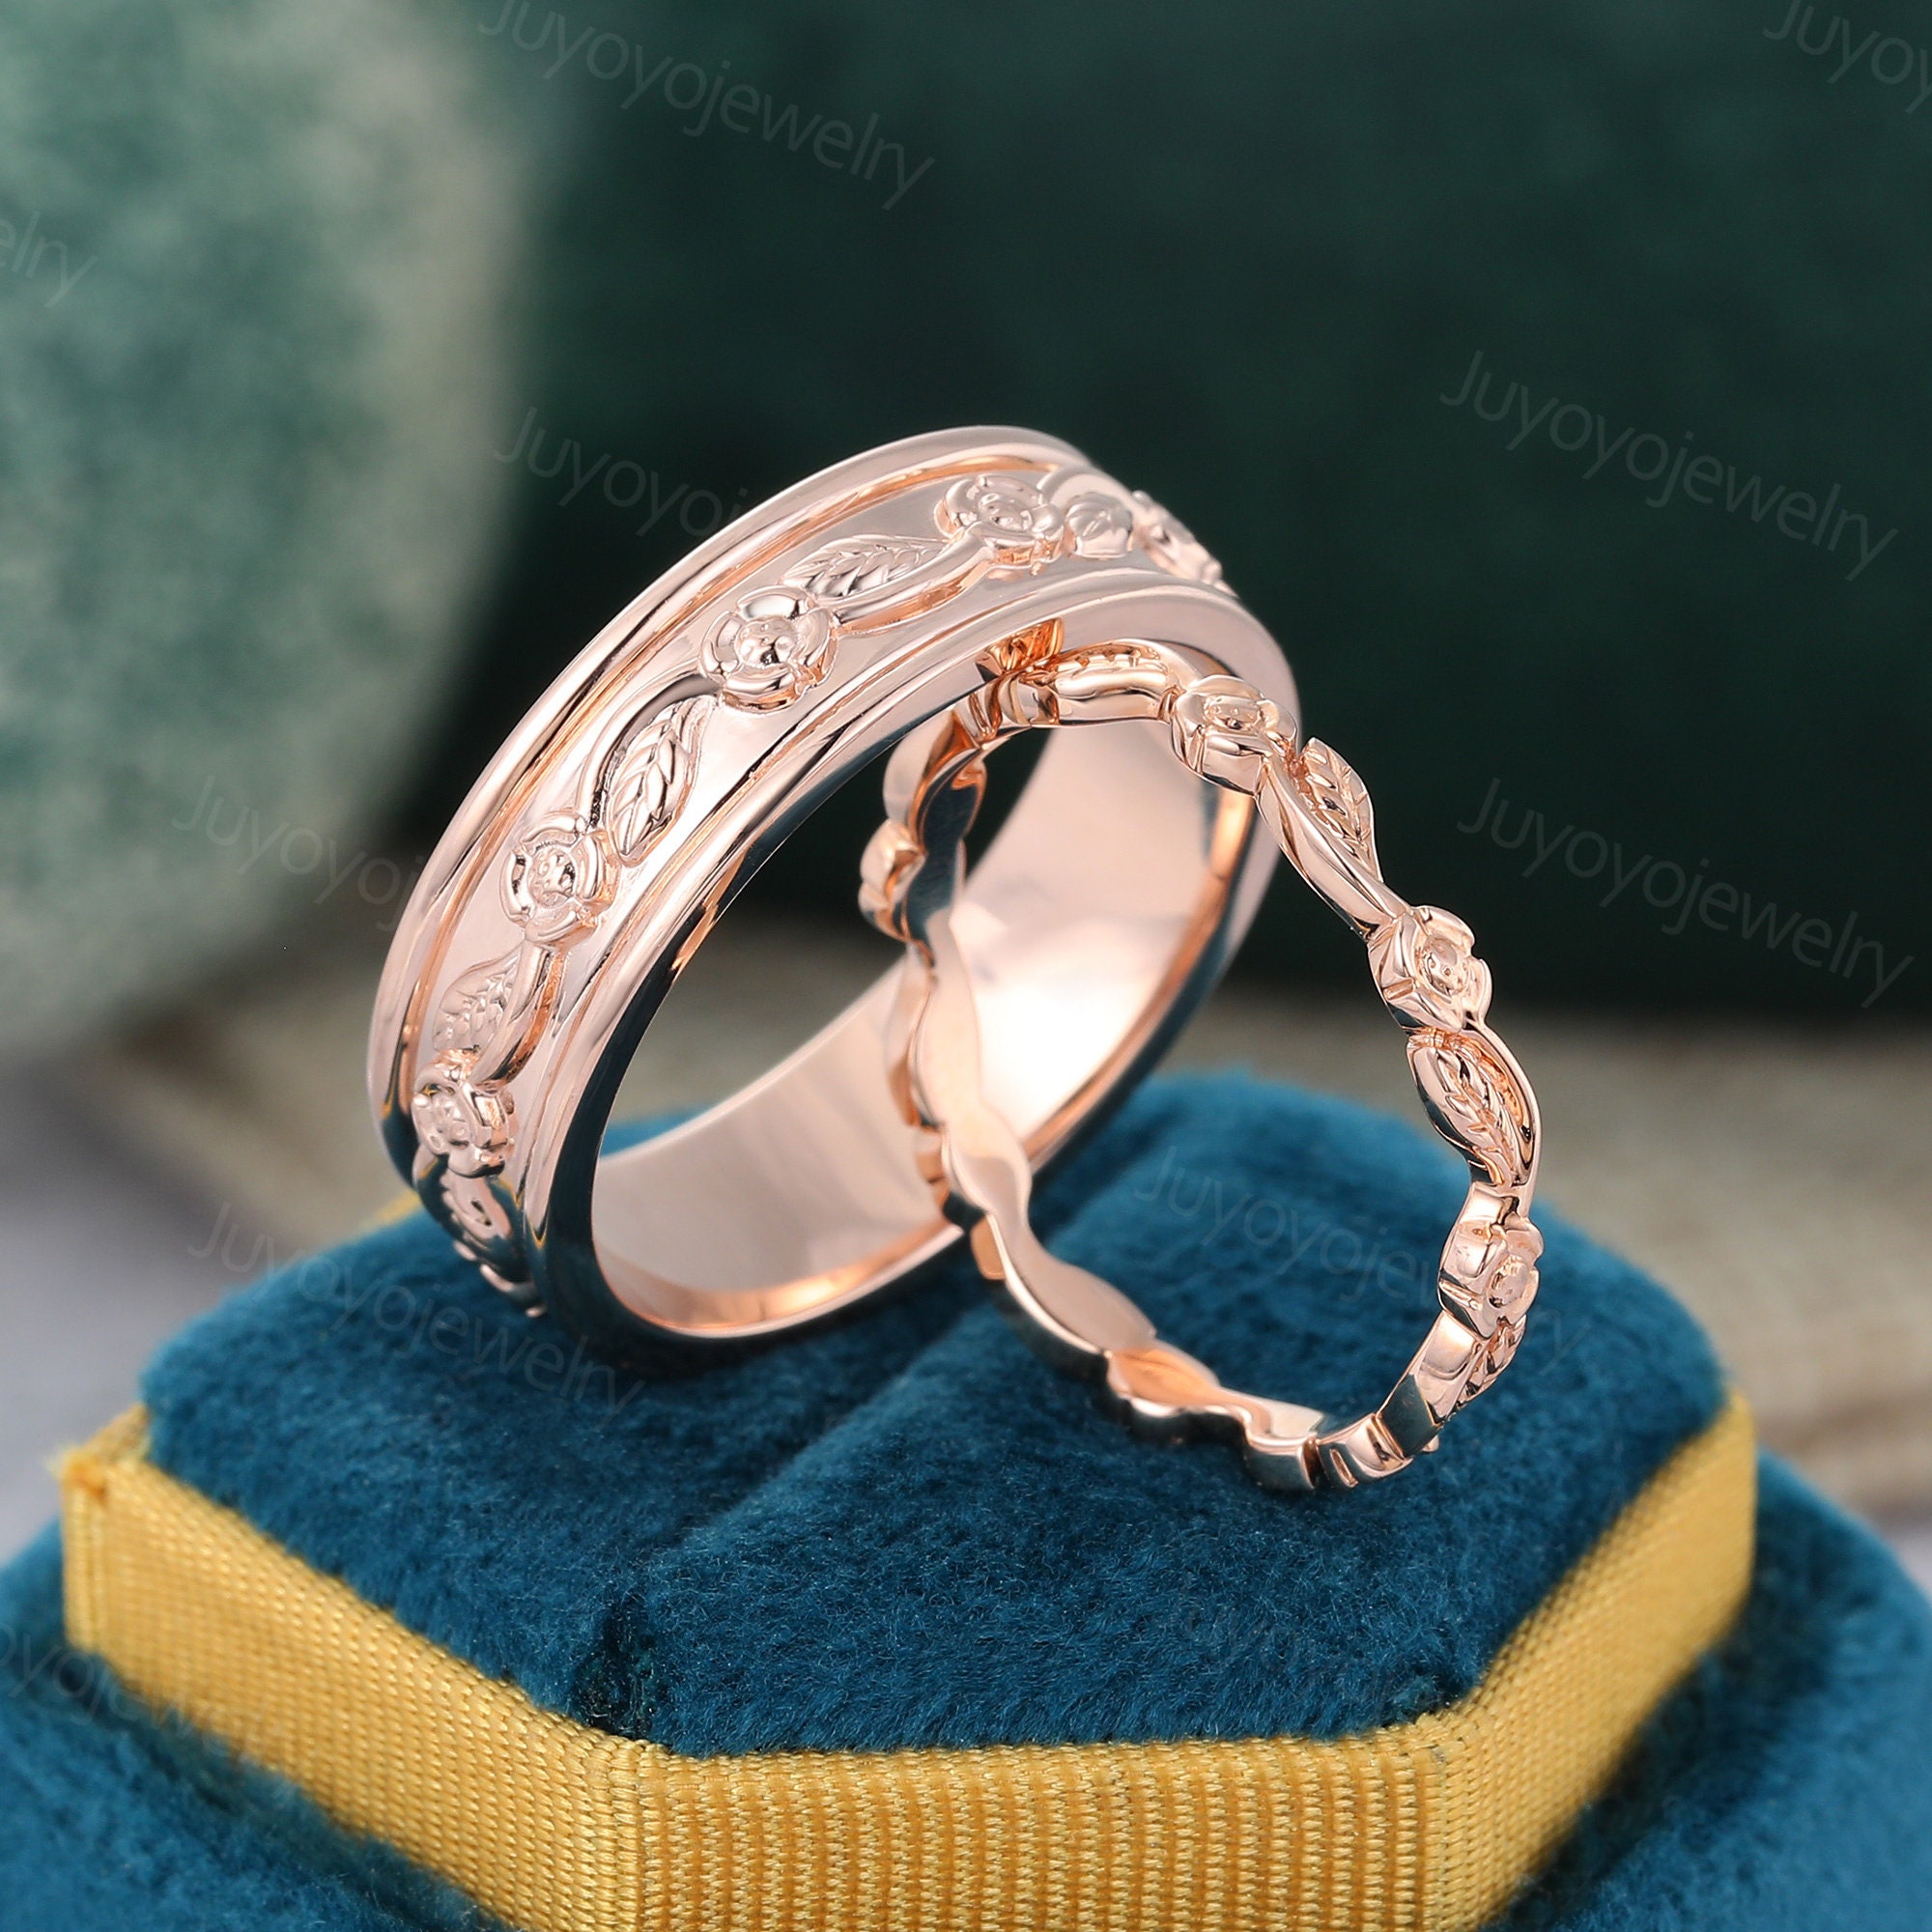 Fancy Elegant Classic Rose Gold Artificial Diamond Engagement Ring For  Couple | eBay